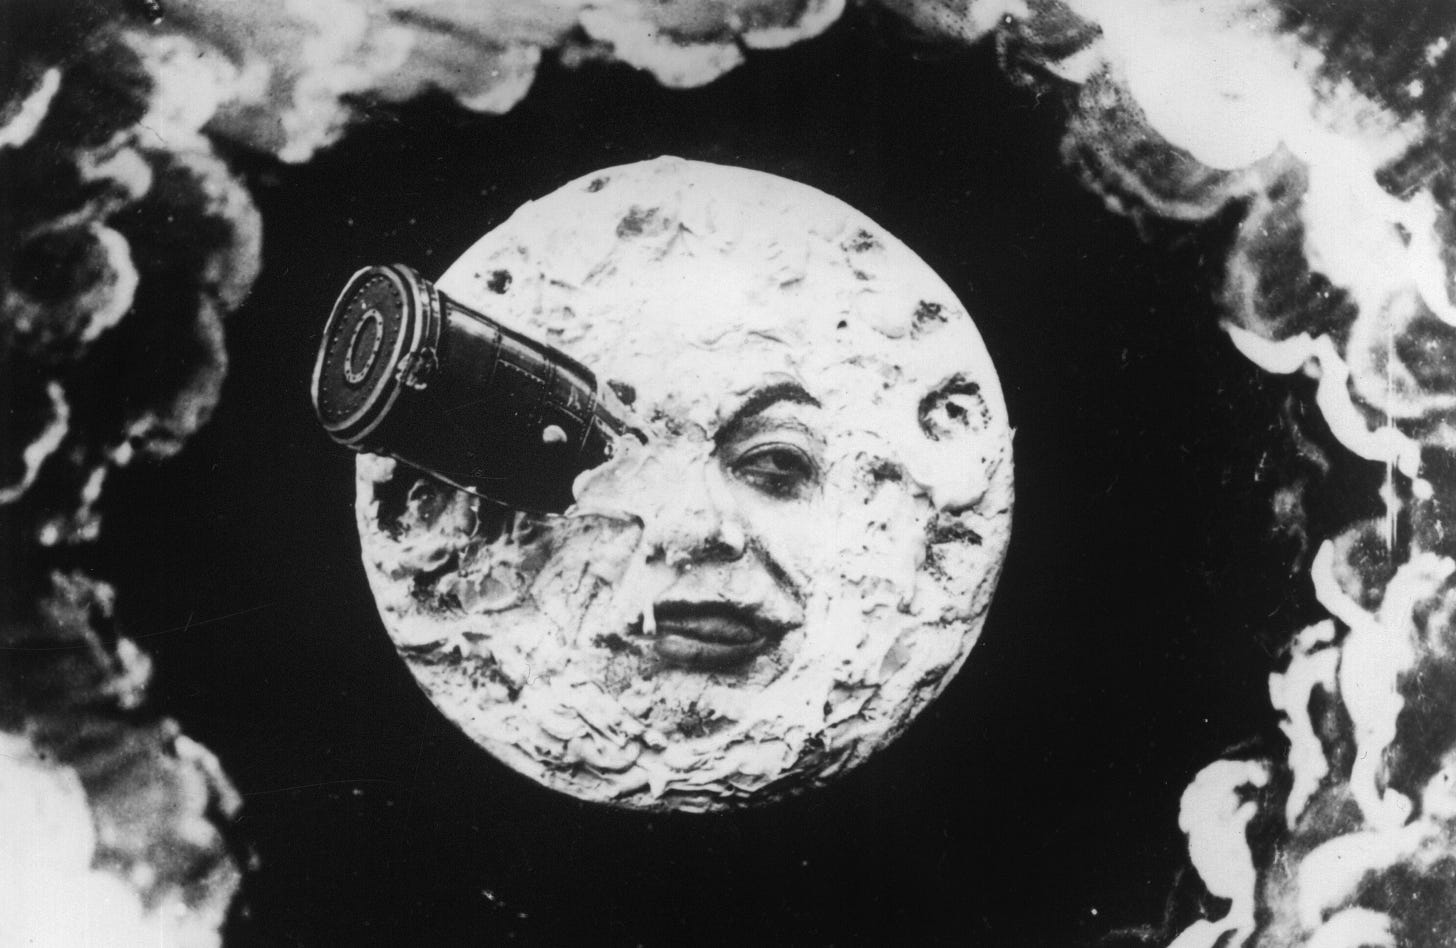 still from a trip to the moon, a moon with a human face and a can in its eye